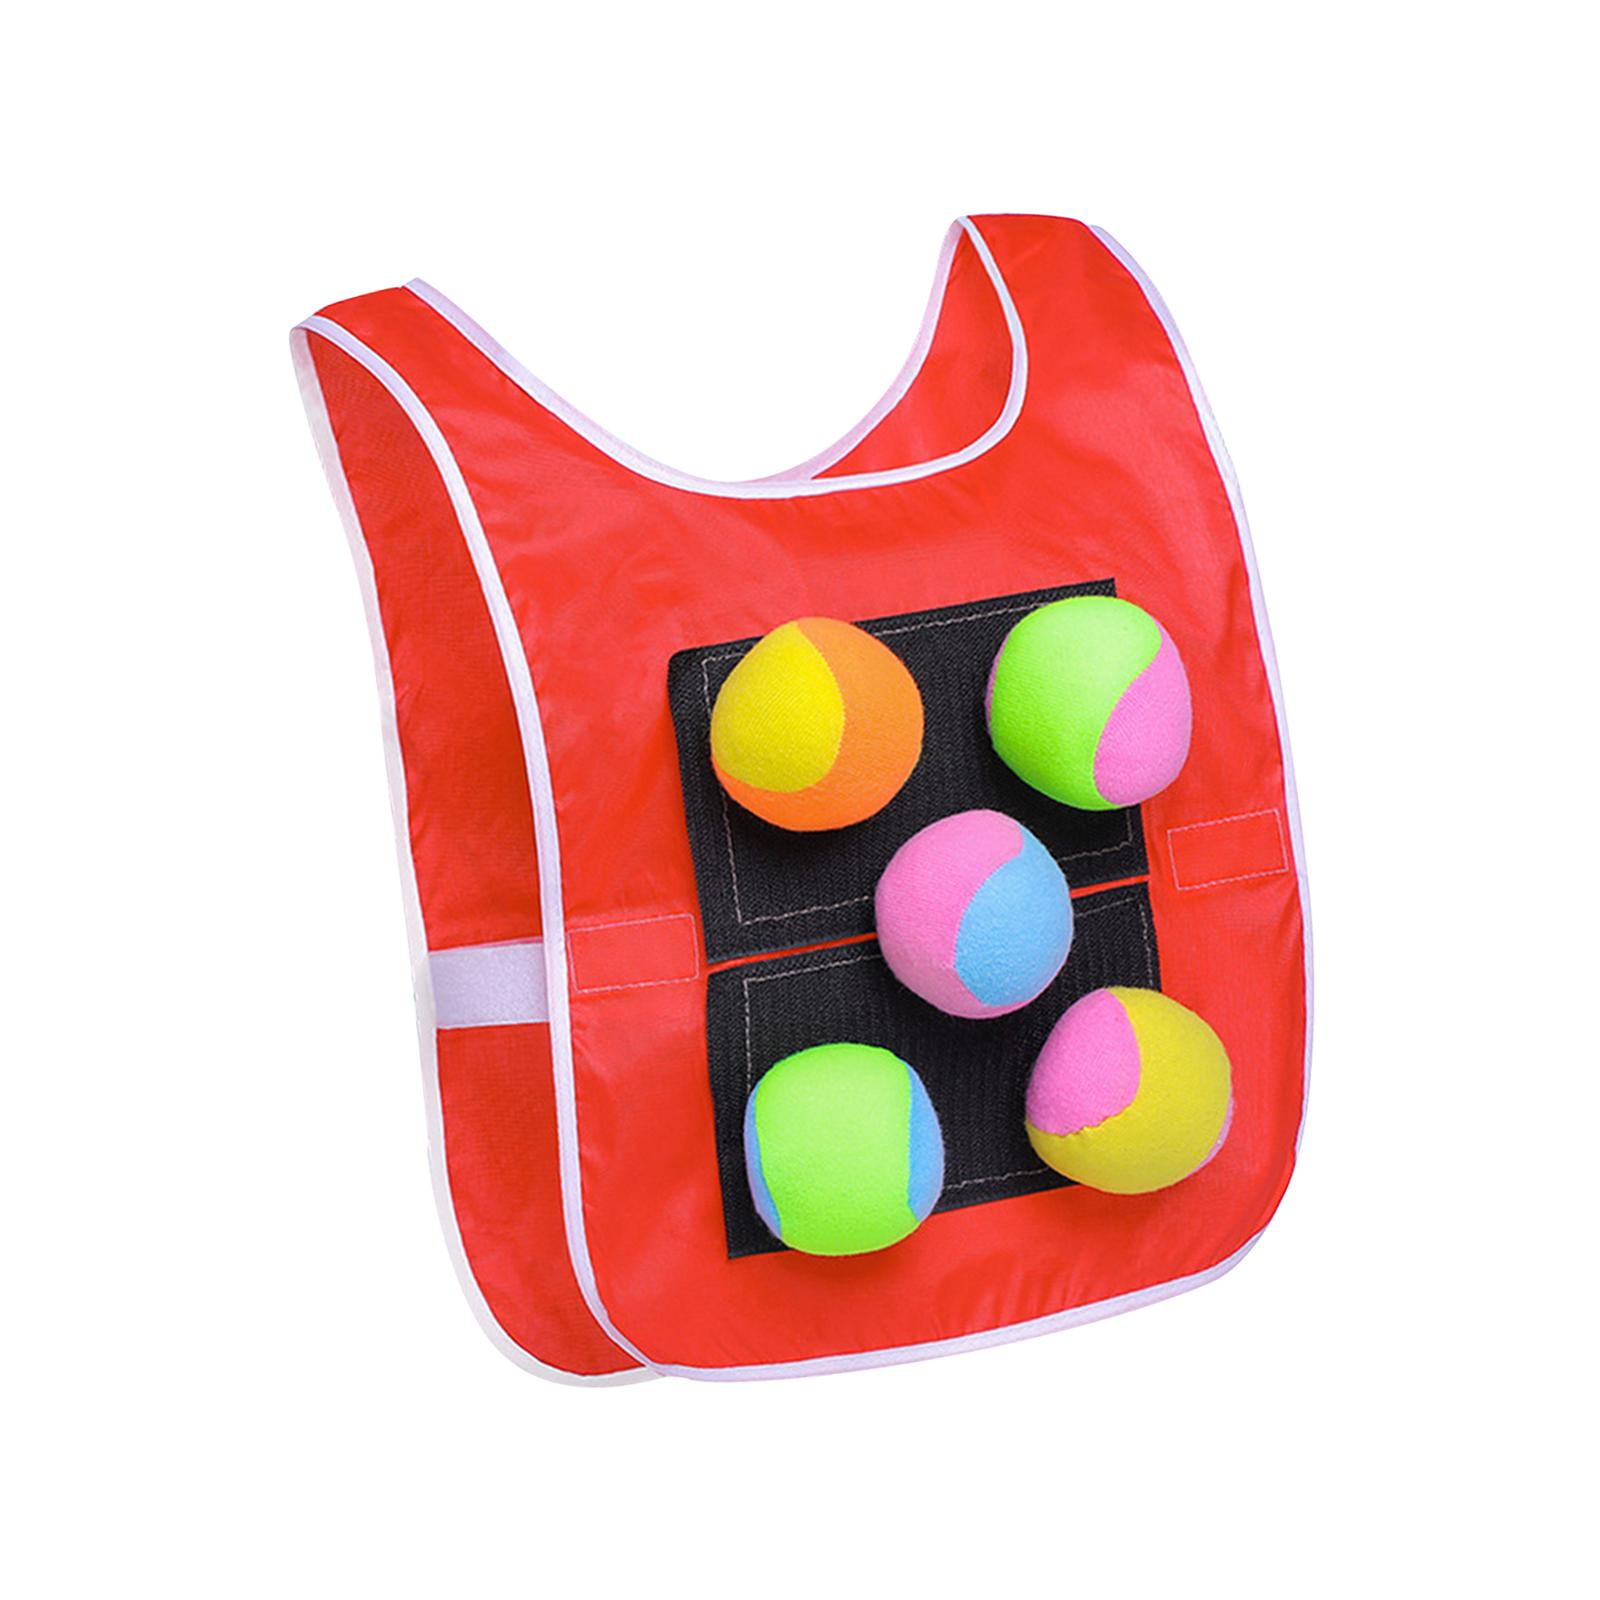 TAKIHON Kids Toss and Catch Ball Set,Dodgeball Game with Sticky